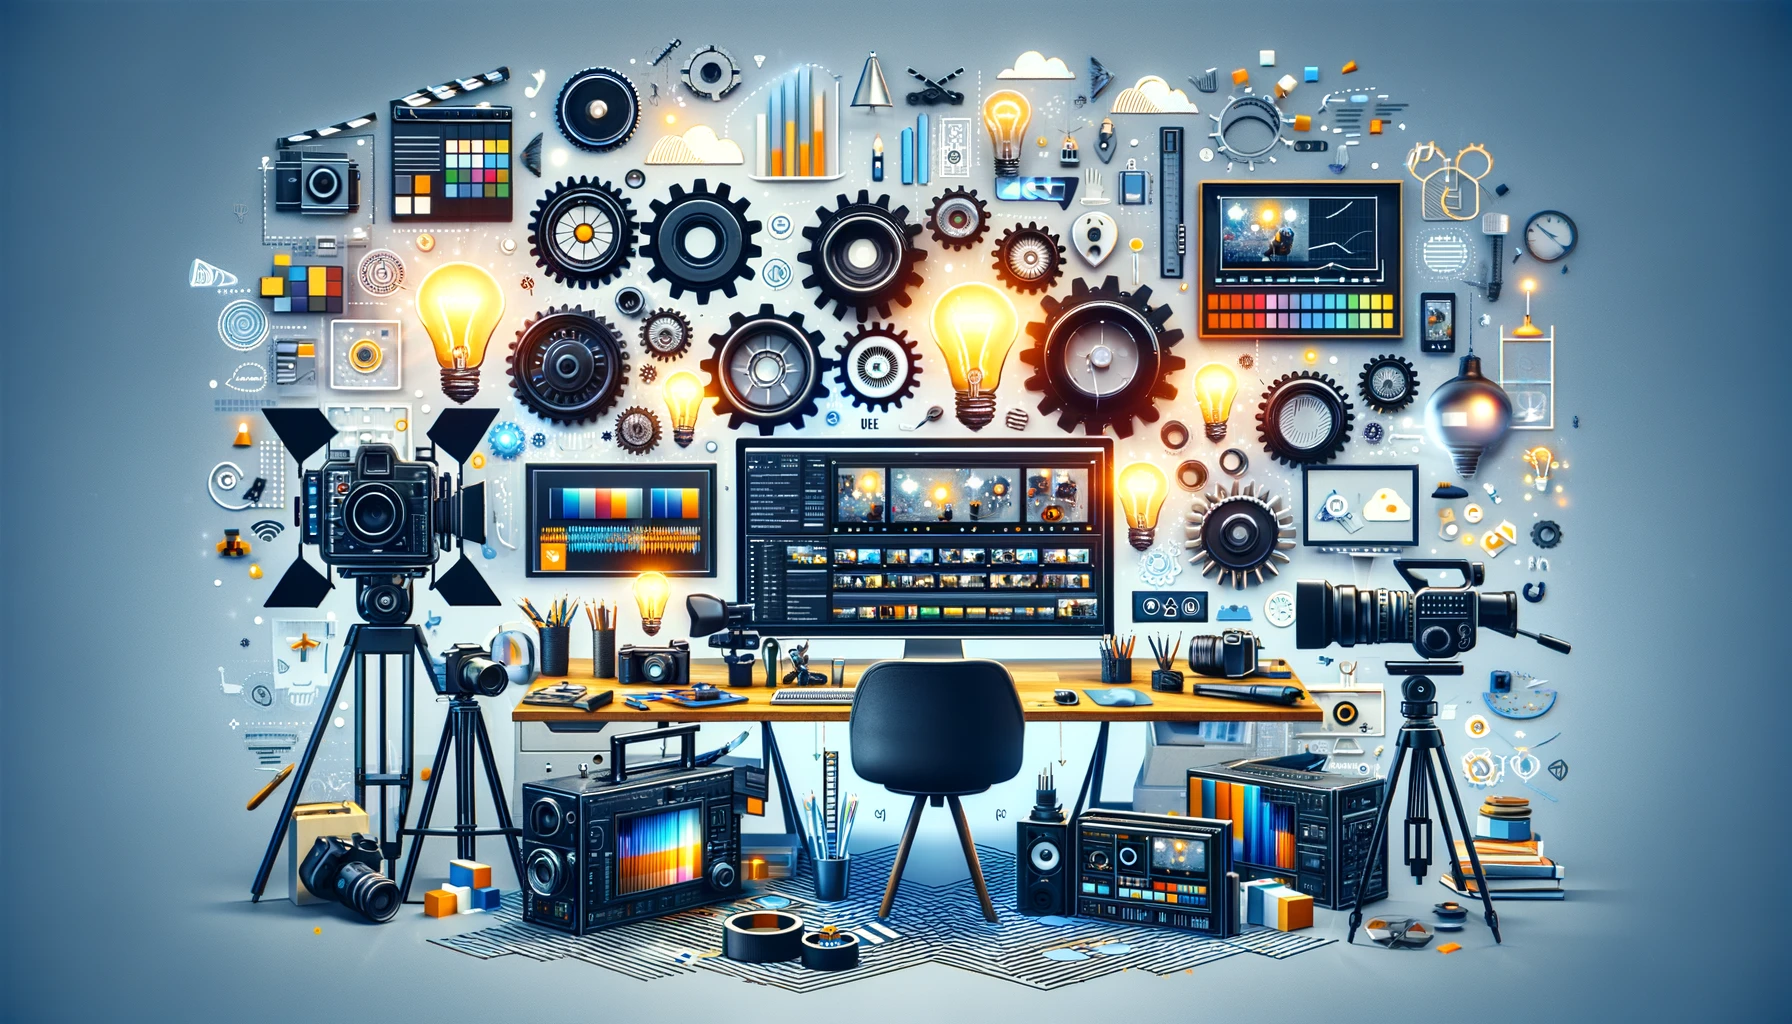 Image illustrating 'Video Content Creation', showing a modern studio environment filled with video production tools like cameras, tripods, and lighting equipment, alongside editing software on computer screens.